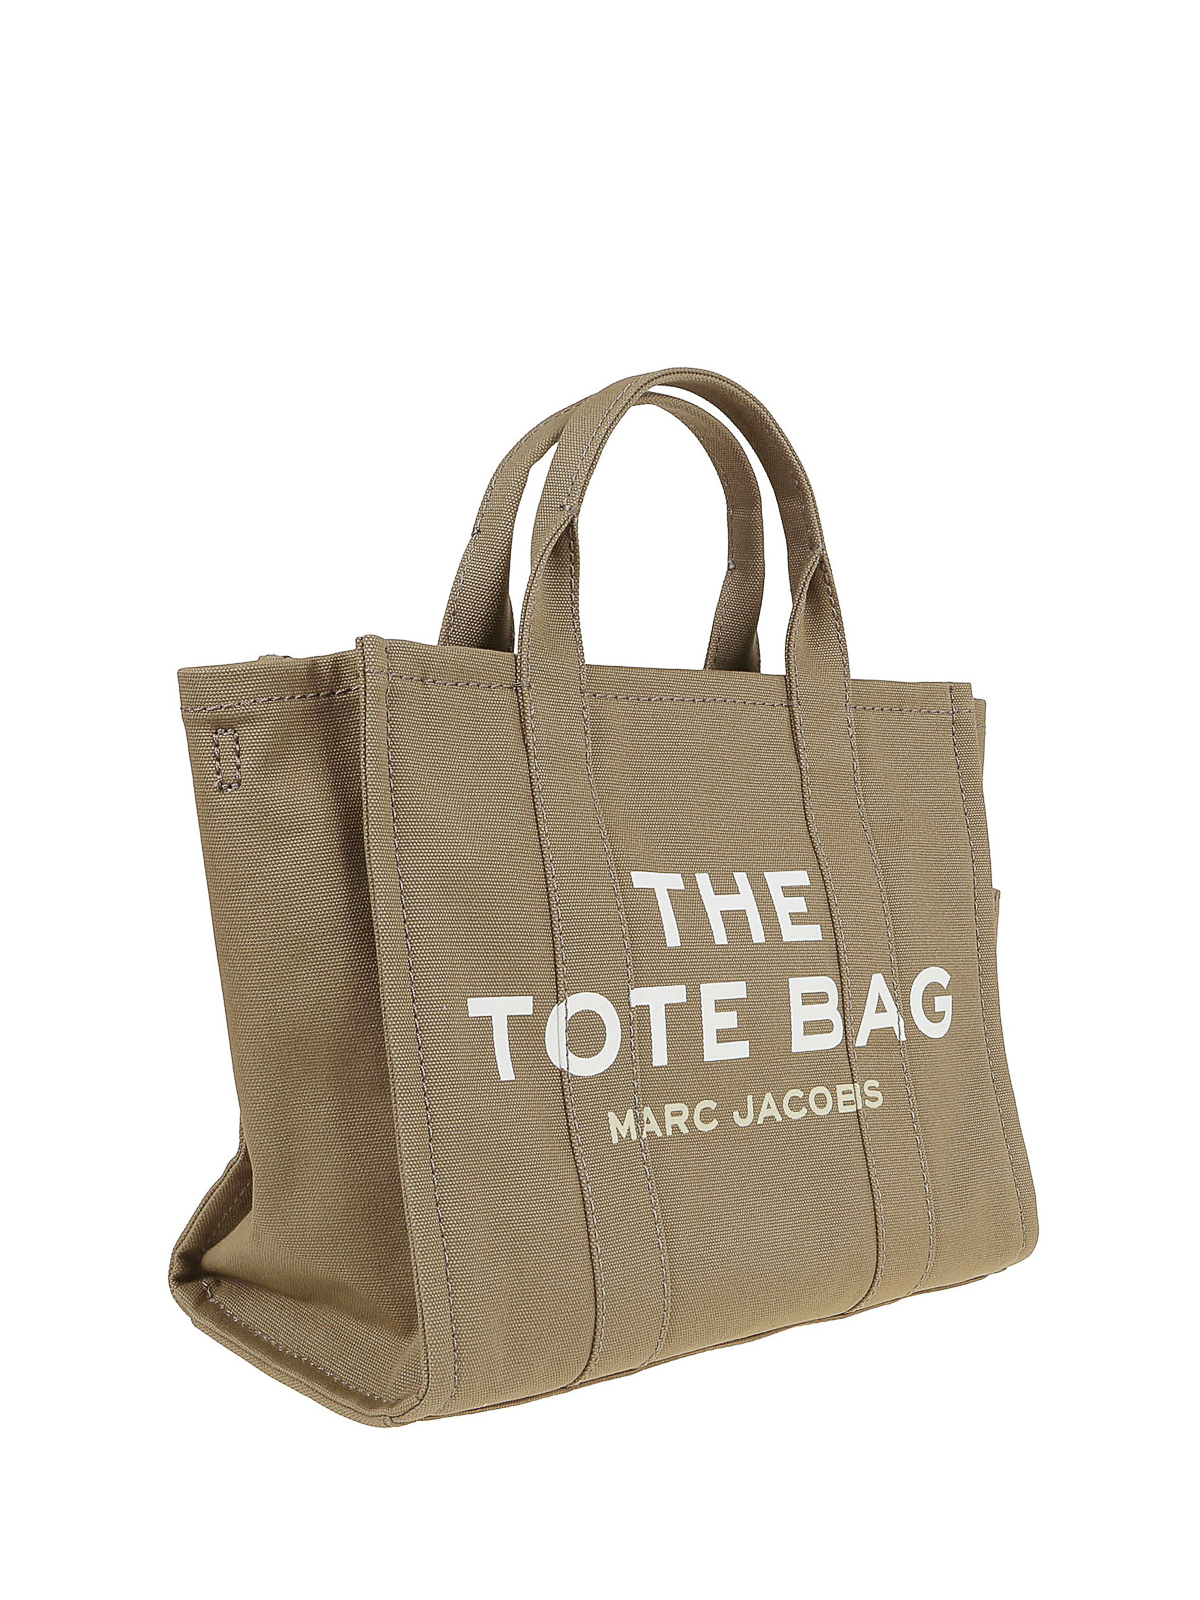 Totes bags Marc Jacobs - The Traveller small tote bag - M0016161372